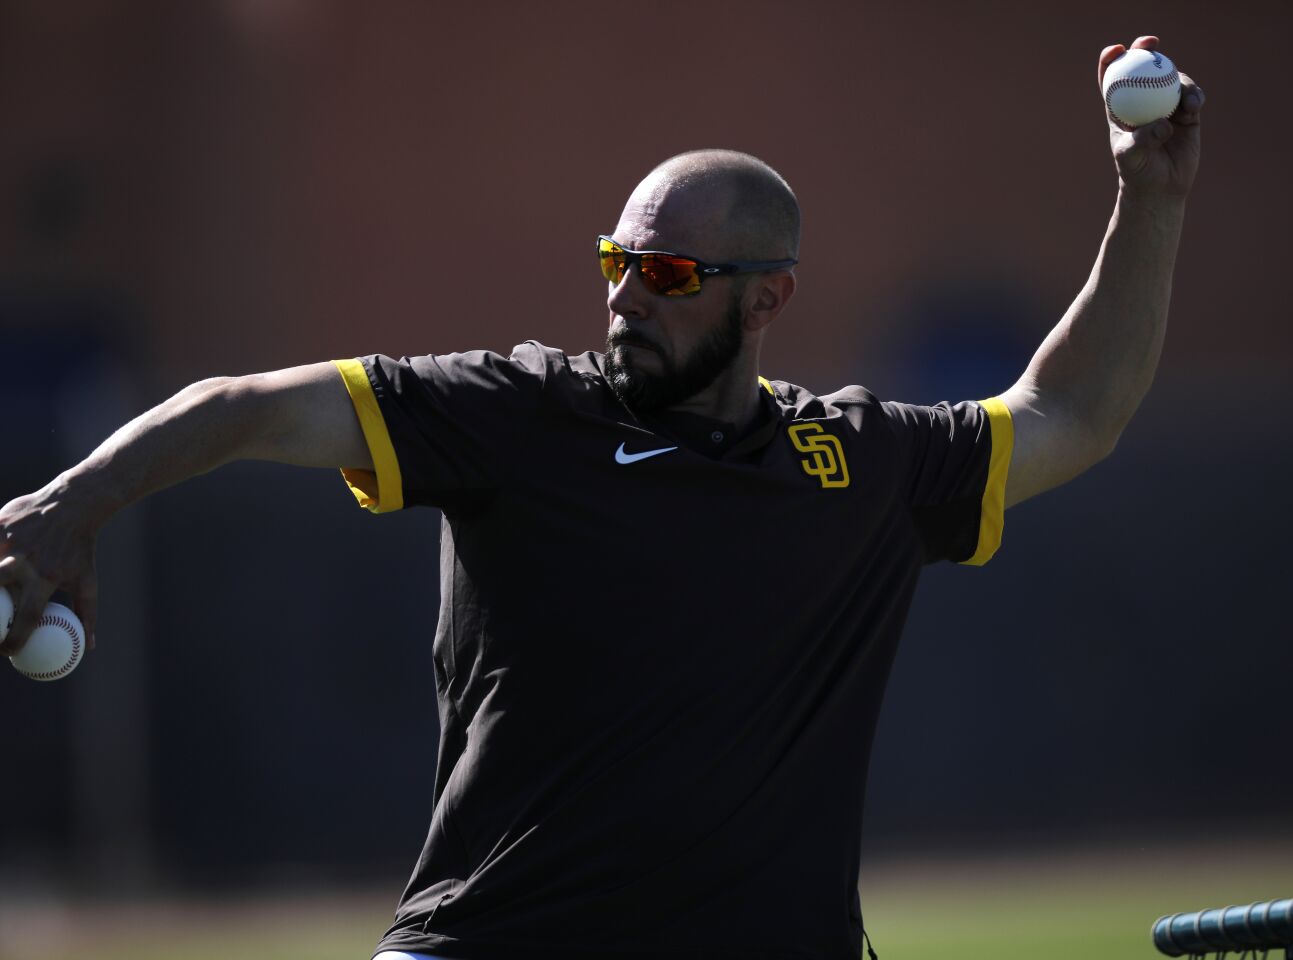 San Diego Padres manager Jayce Tingler pitches during a spring training practice on Feb. 18, 2020.